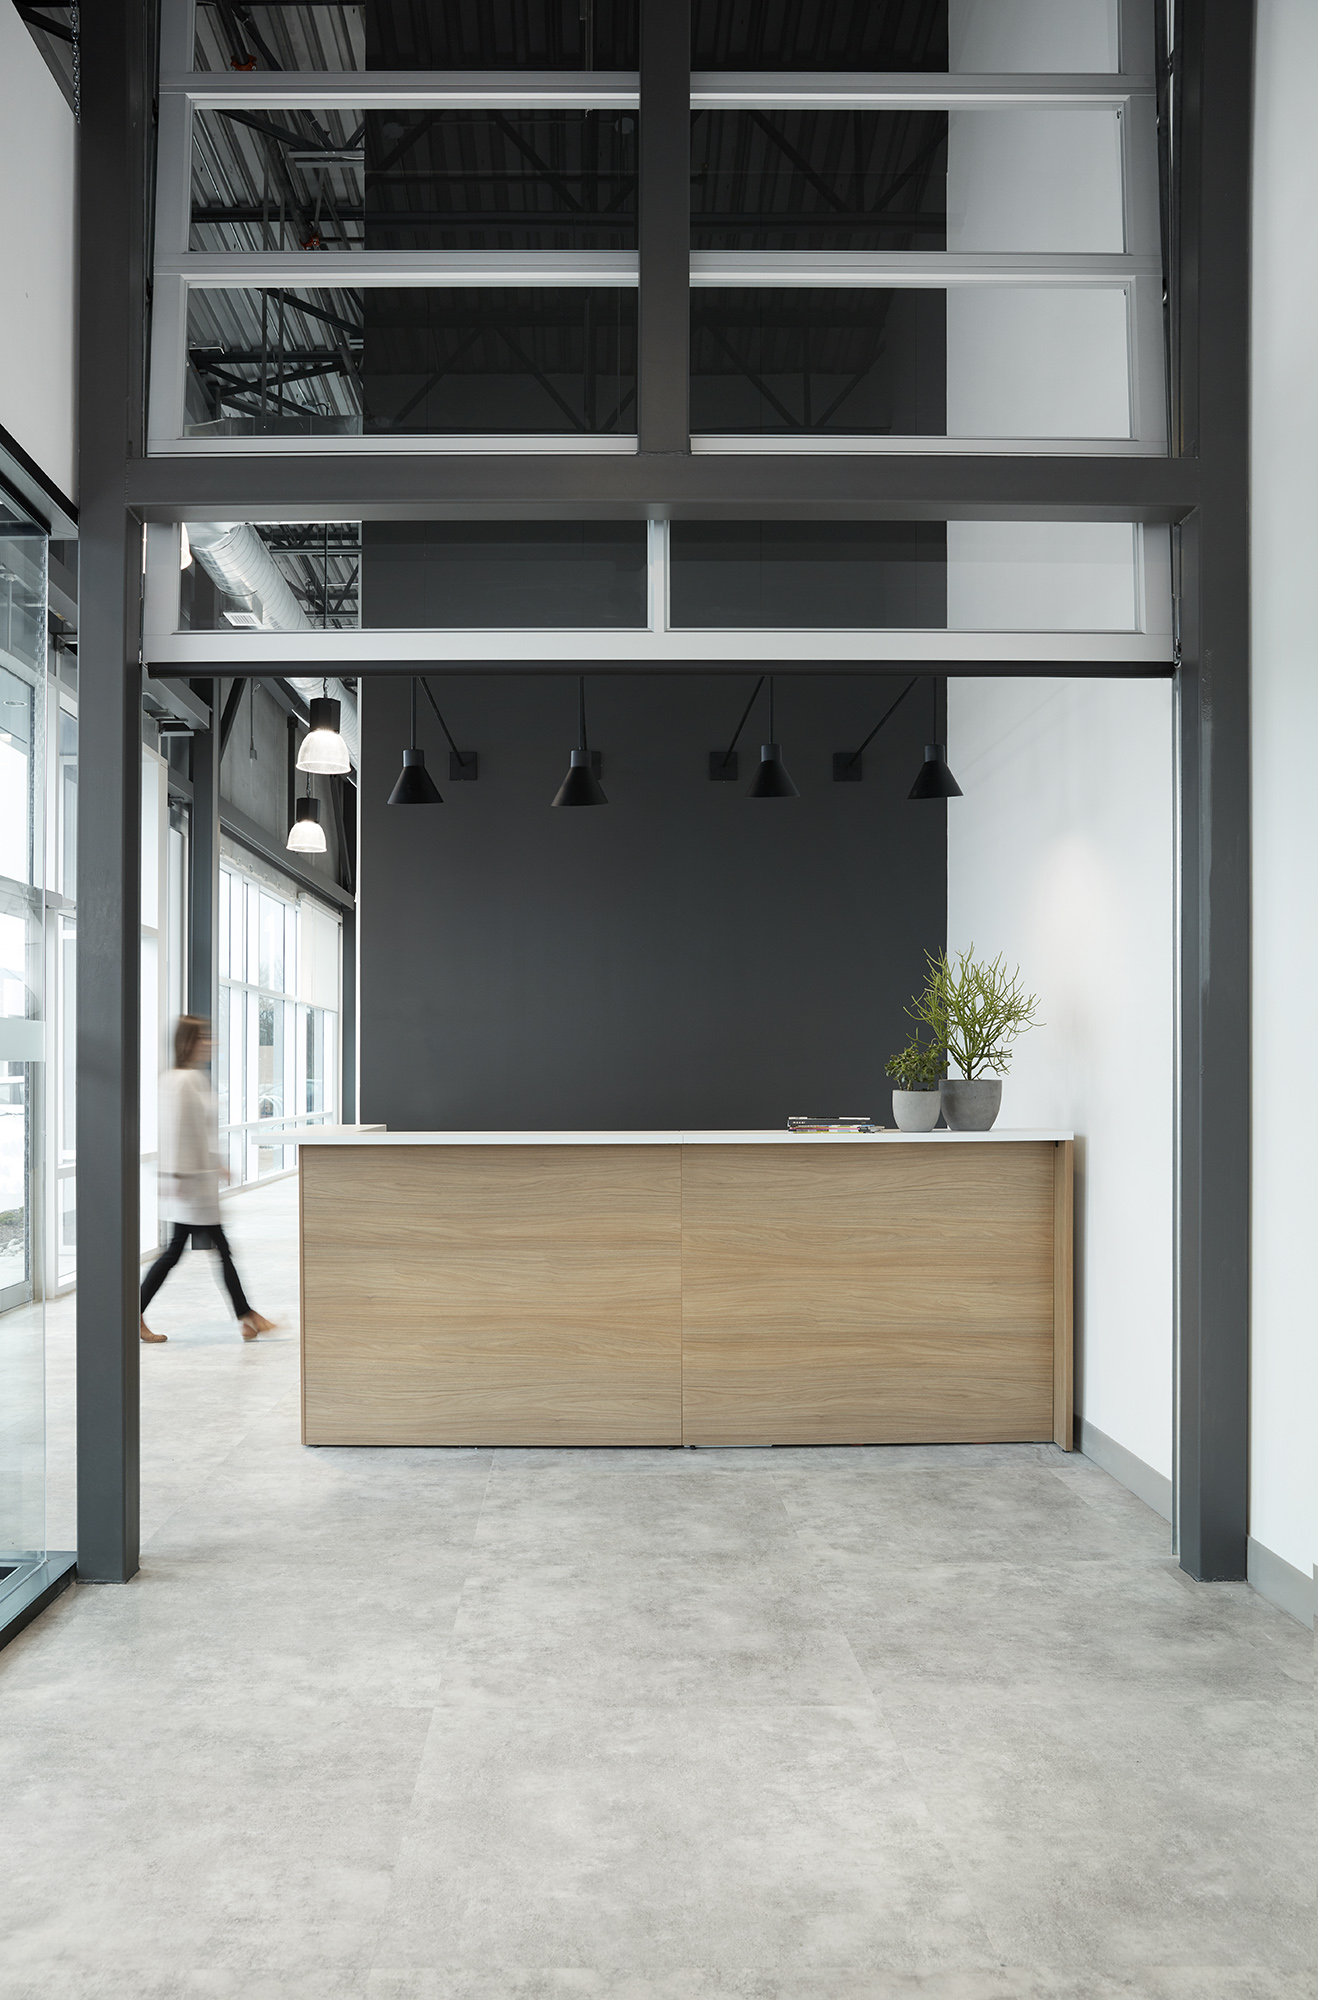 Reception Area with polished concrete floors and garage-style door.